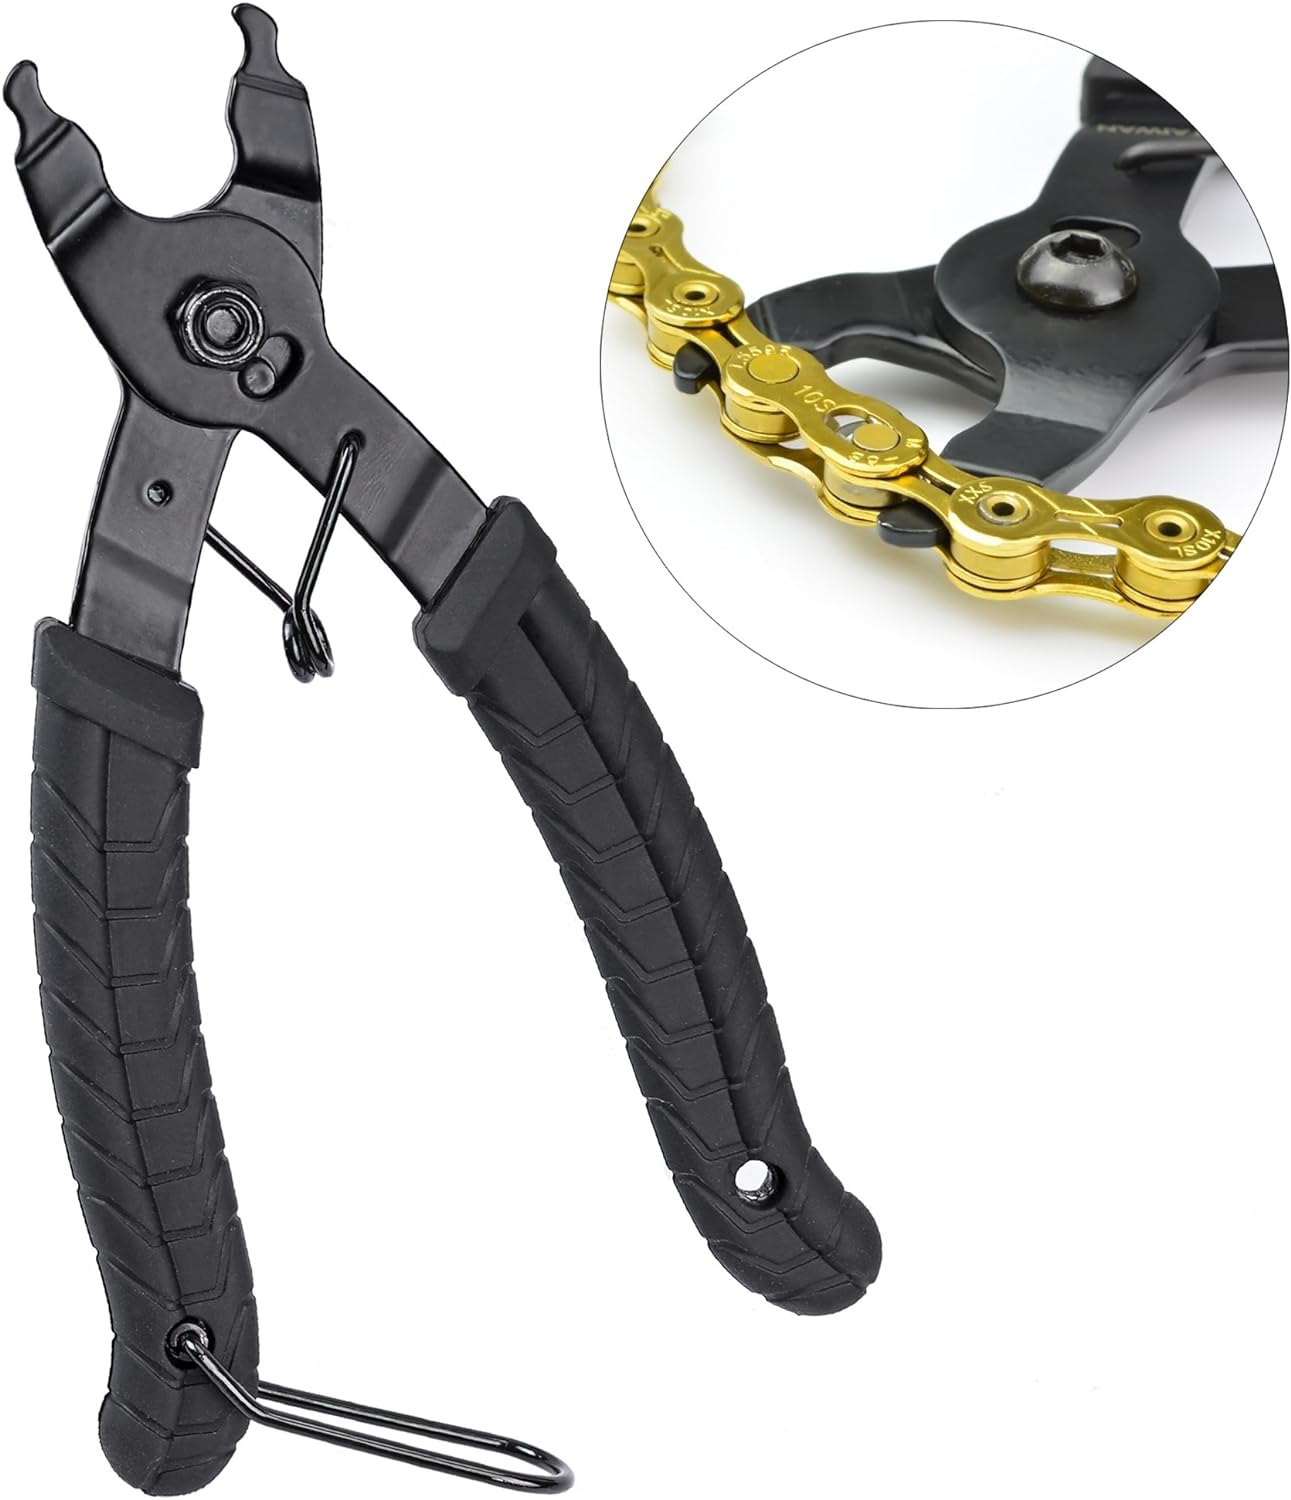 Master Link Tool image from Amazon